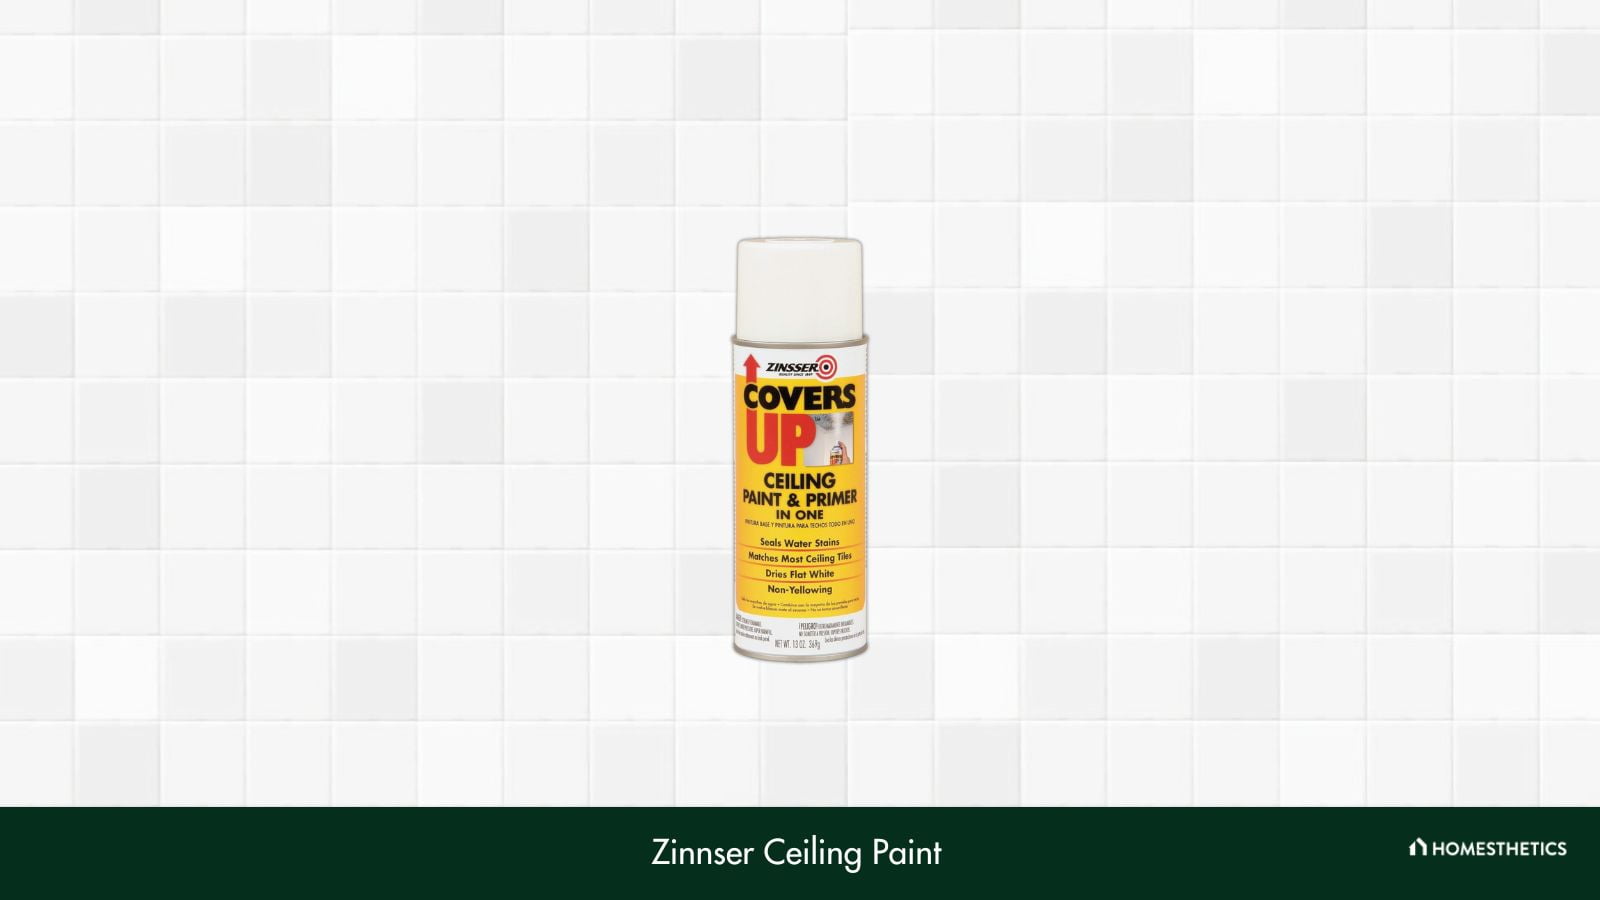 Zinnser 03688 Covers Up Stain Sealing Ceiling Paint